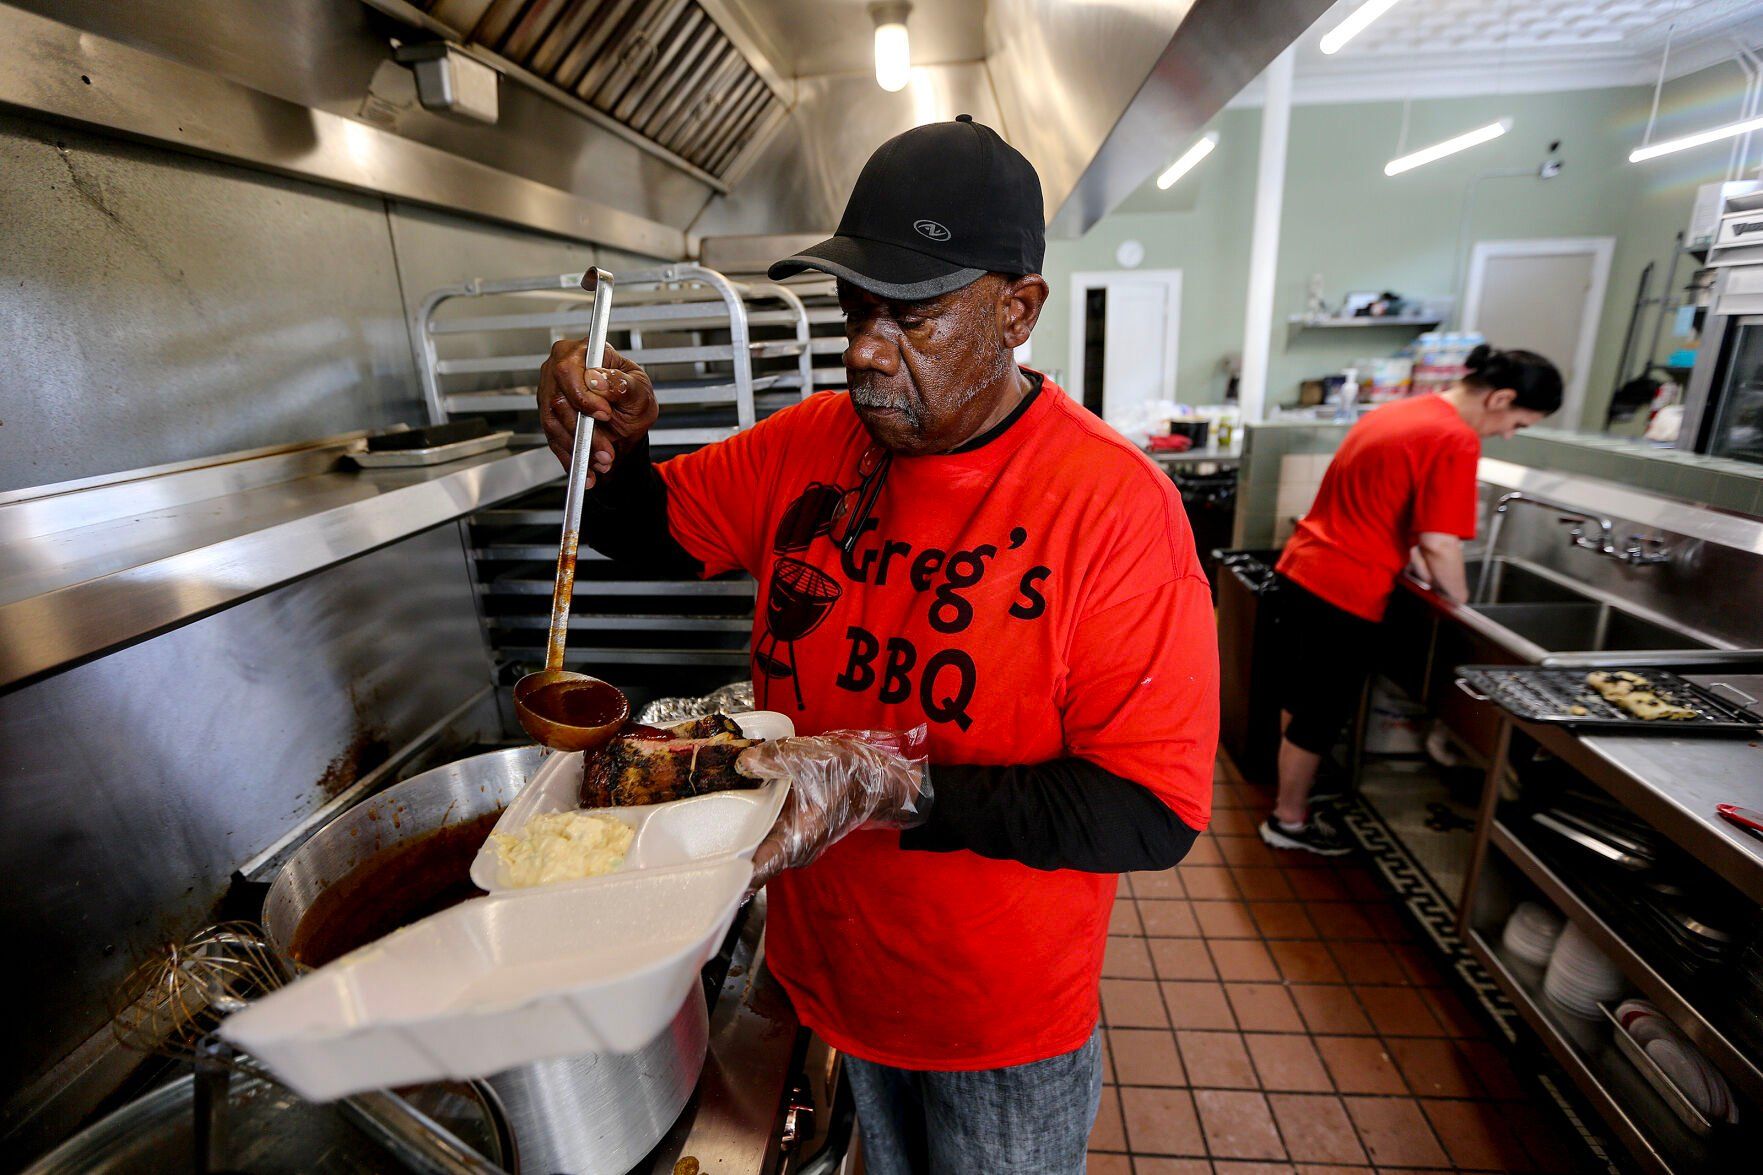 Greg Harrison, owner of Greg’s BBQ, prepares ribs at his business on Central Avenue in Dubuque on Thursday.    PHOTO CREDIT: Dave Kettering